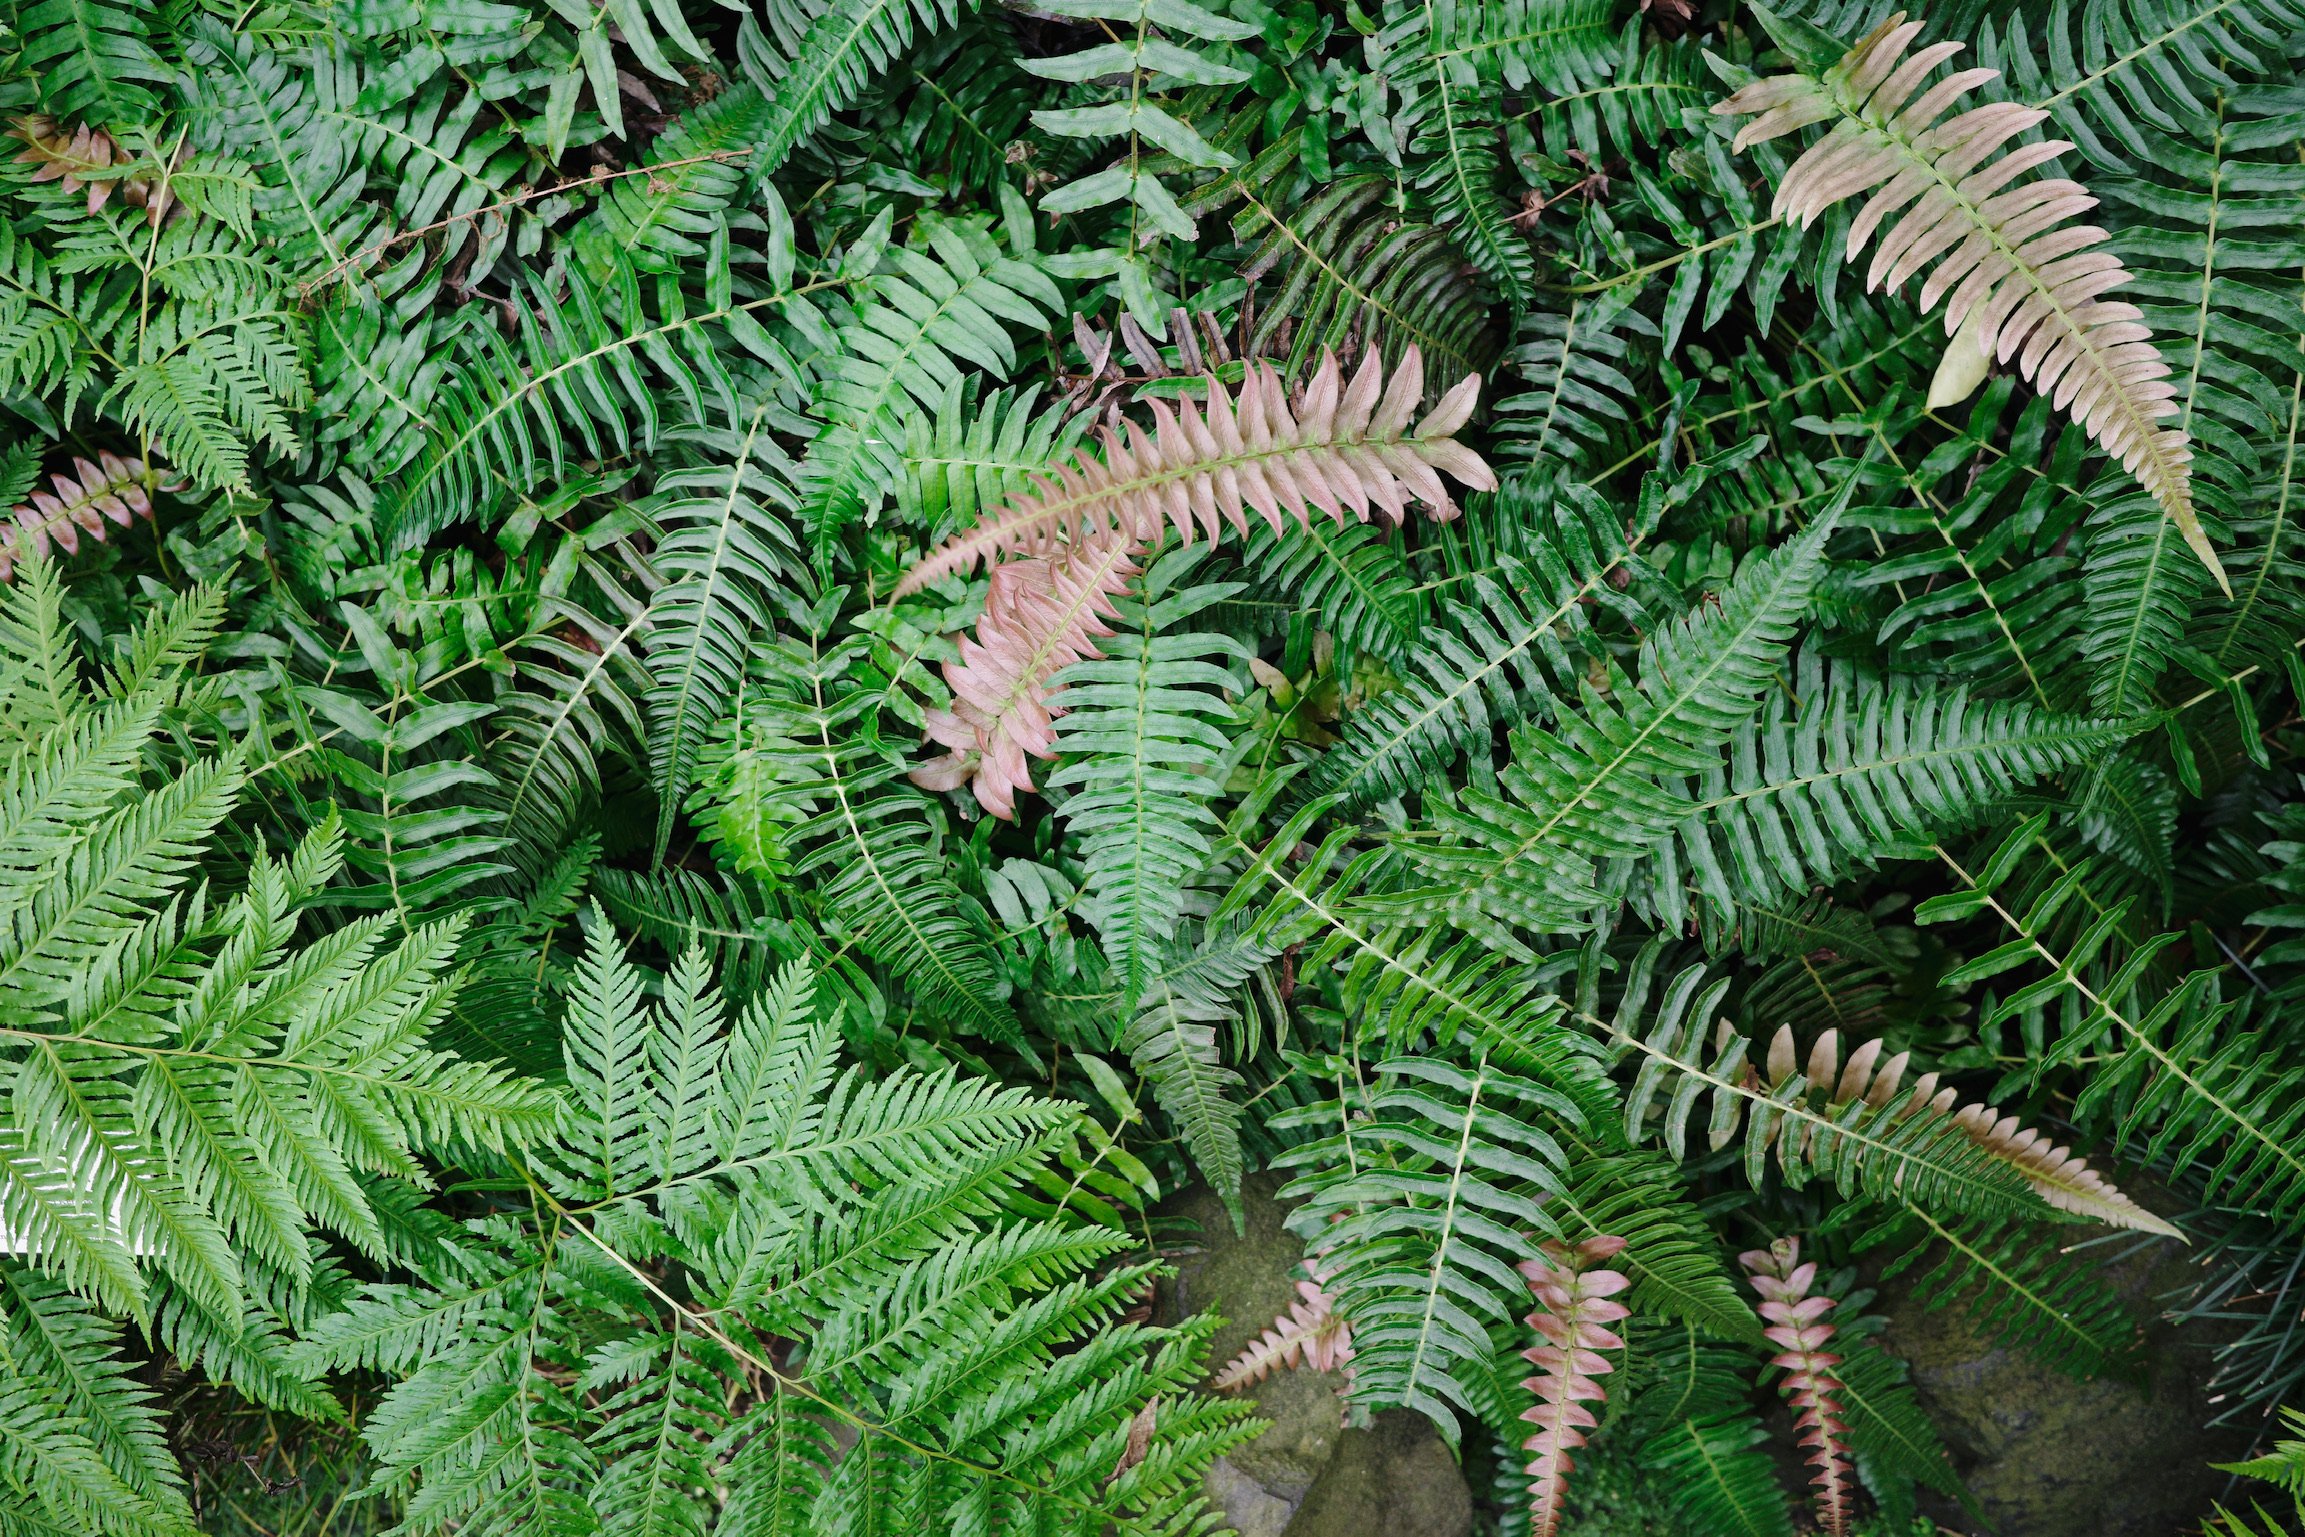 different types of ferns covering the whole shot.